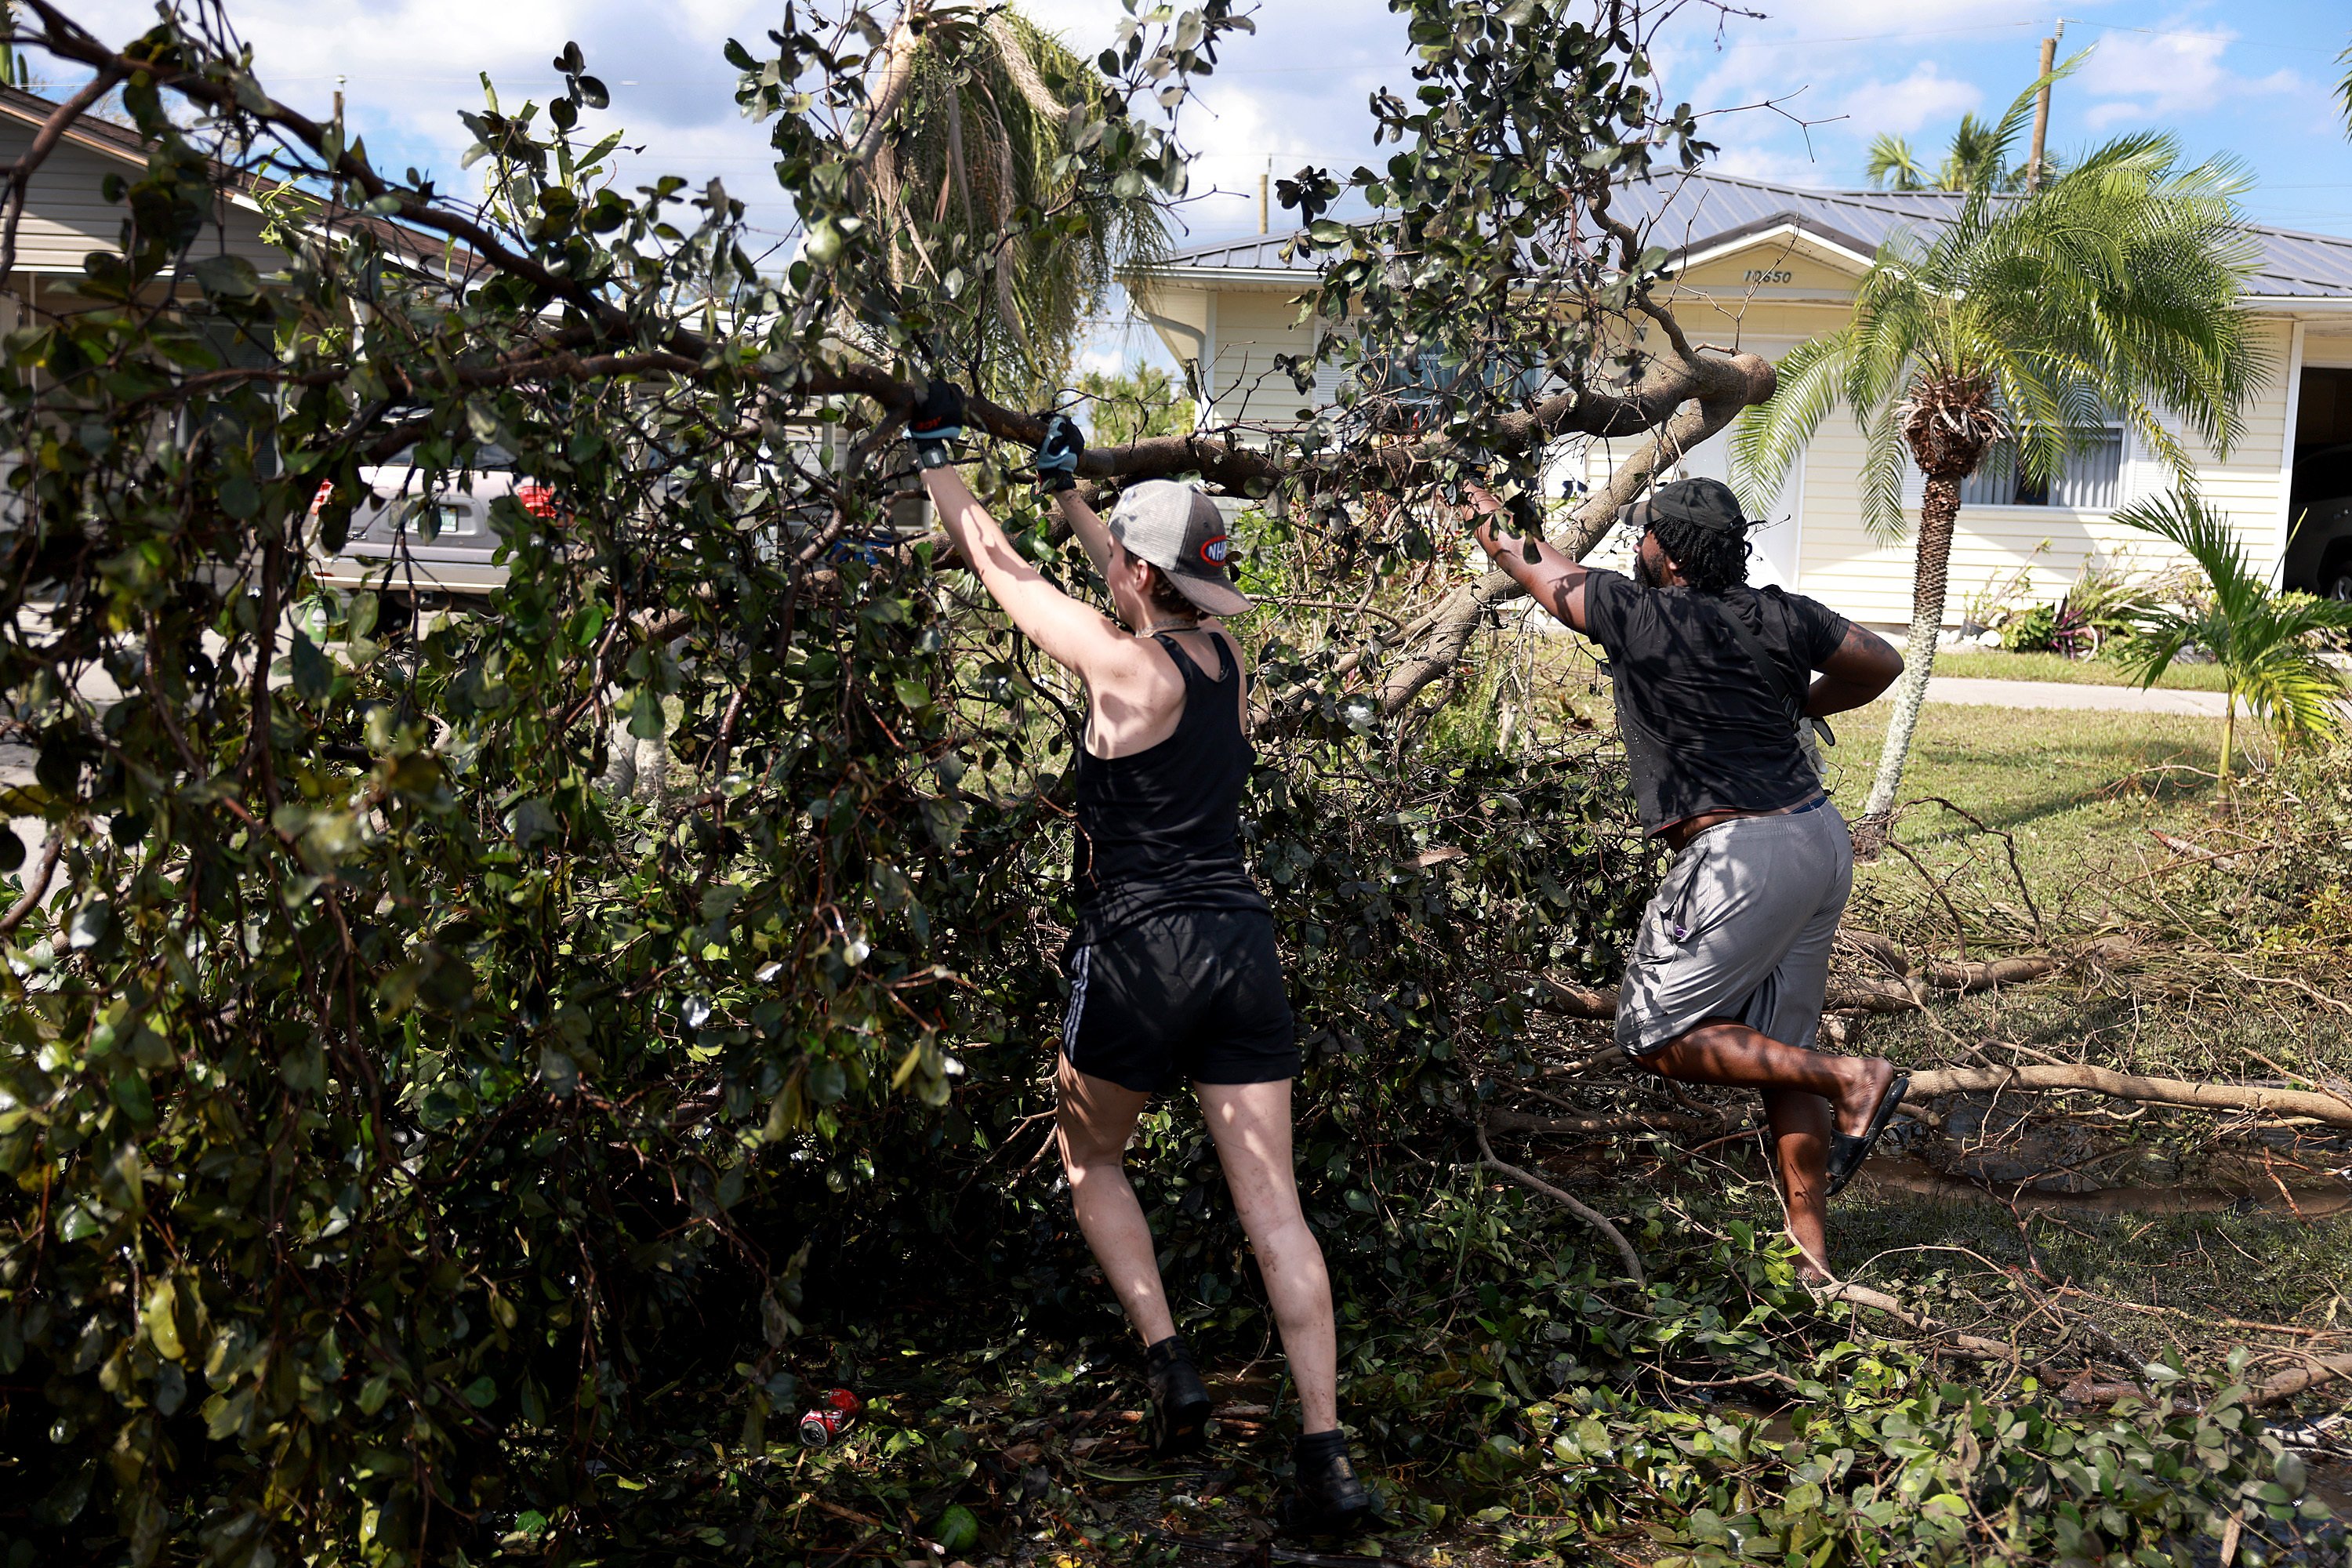 Allison Huston (L) and Malik Jean clear a tree from a road after Hurricane Ian passed through on October 1, 2022 in Fort Myers, Florida. The Category 4 hurricane caused severe damage to the region.